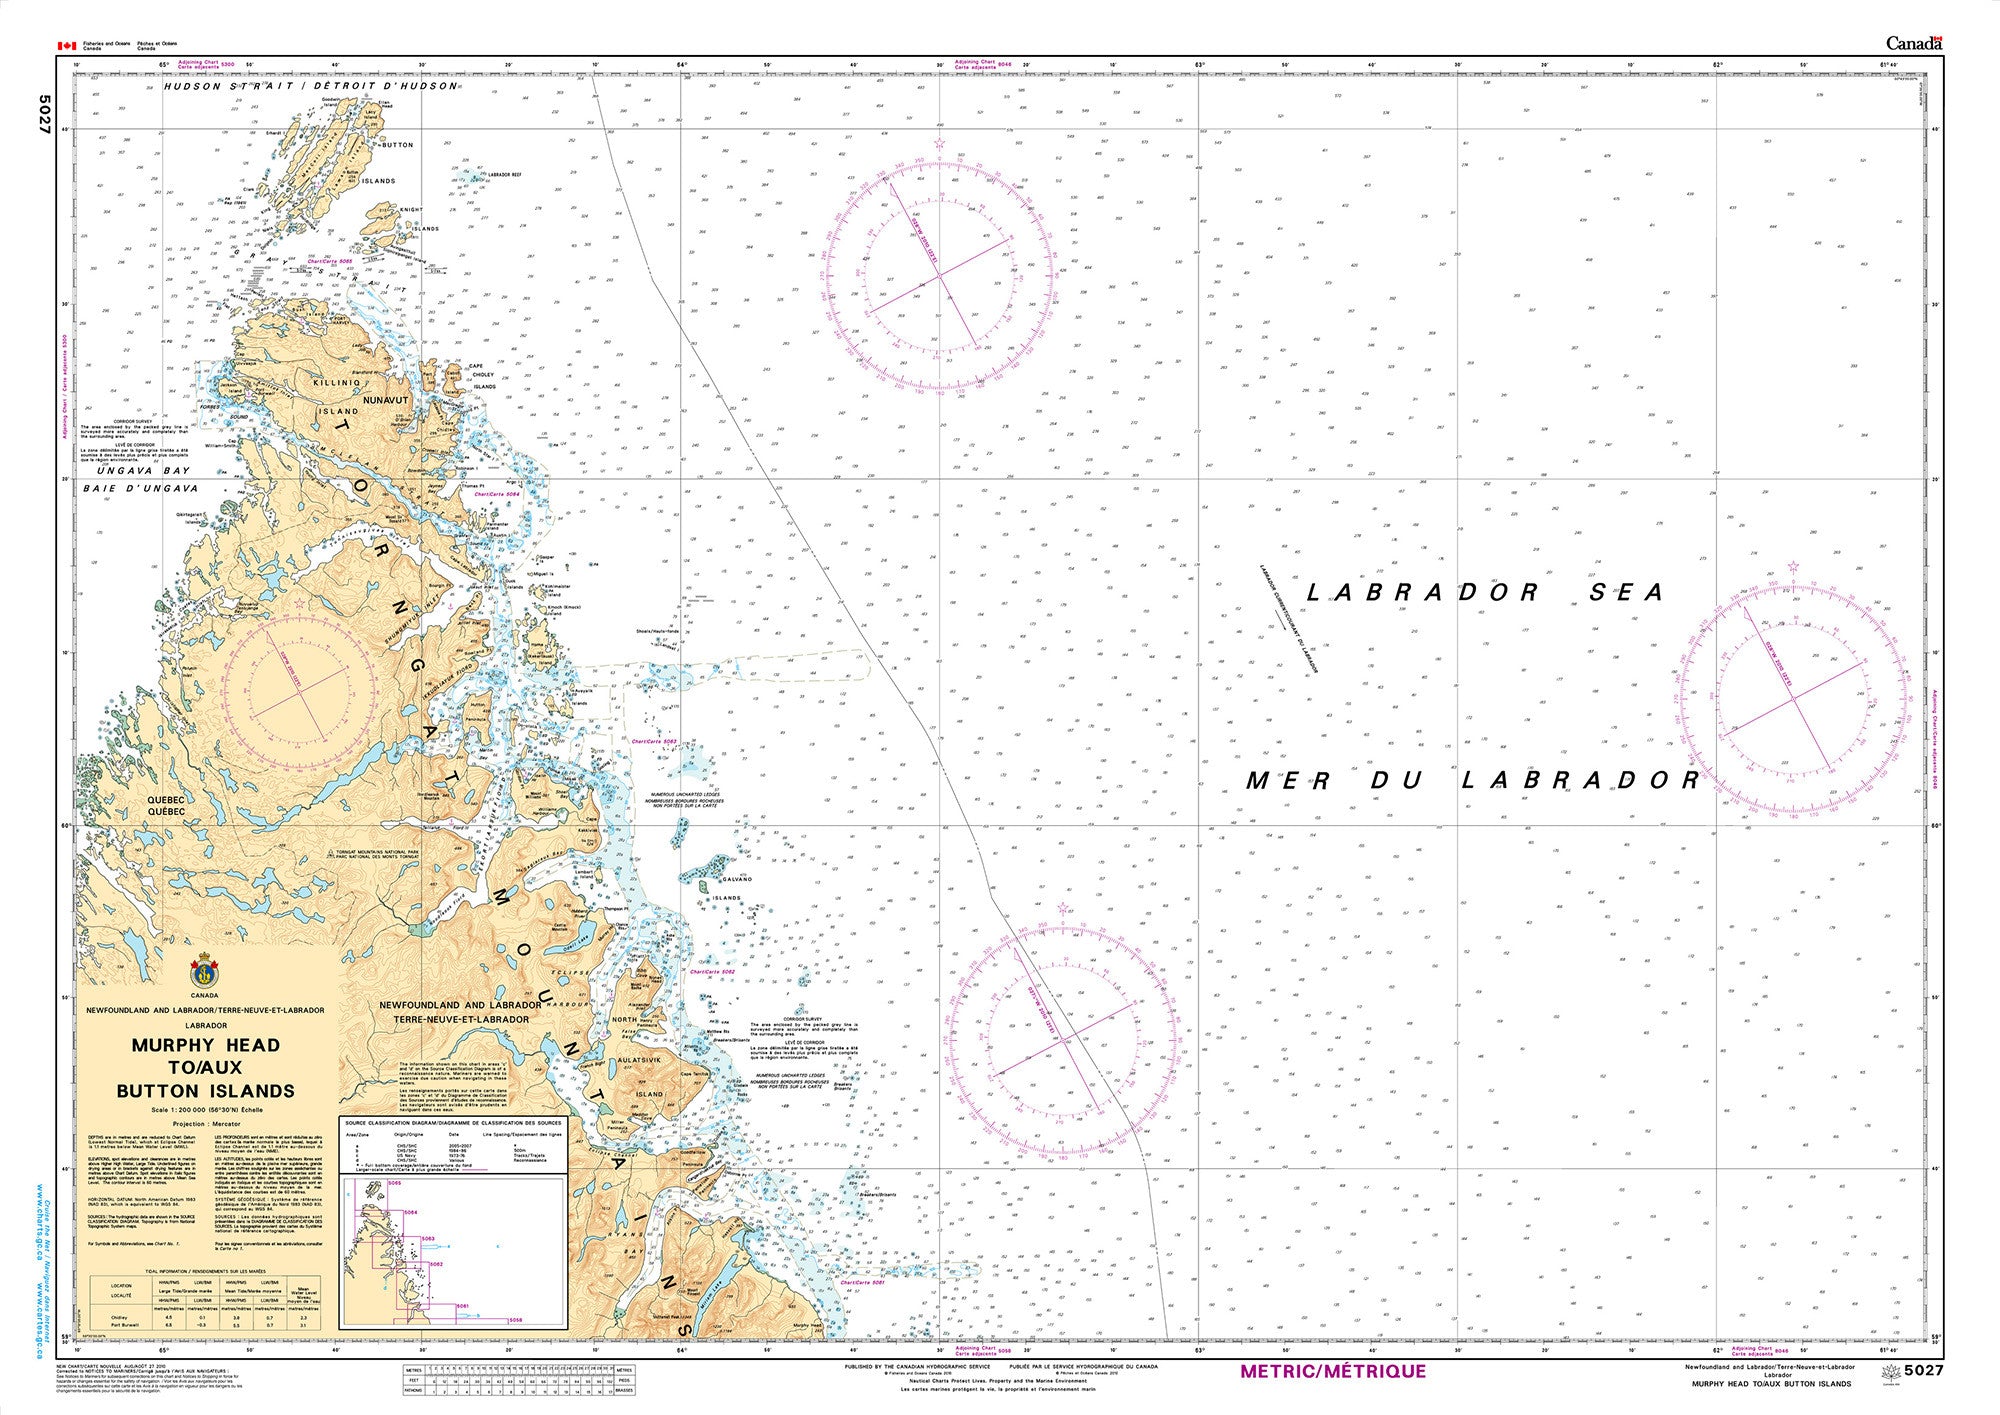 Canadian Hydrographic Service Nautical Chart CHS5027: Murphy Head to/aux Button Islands